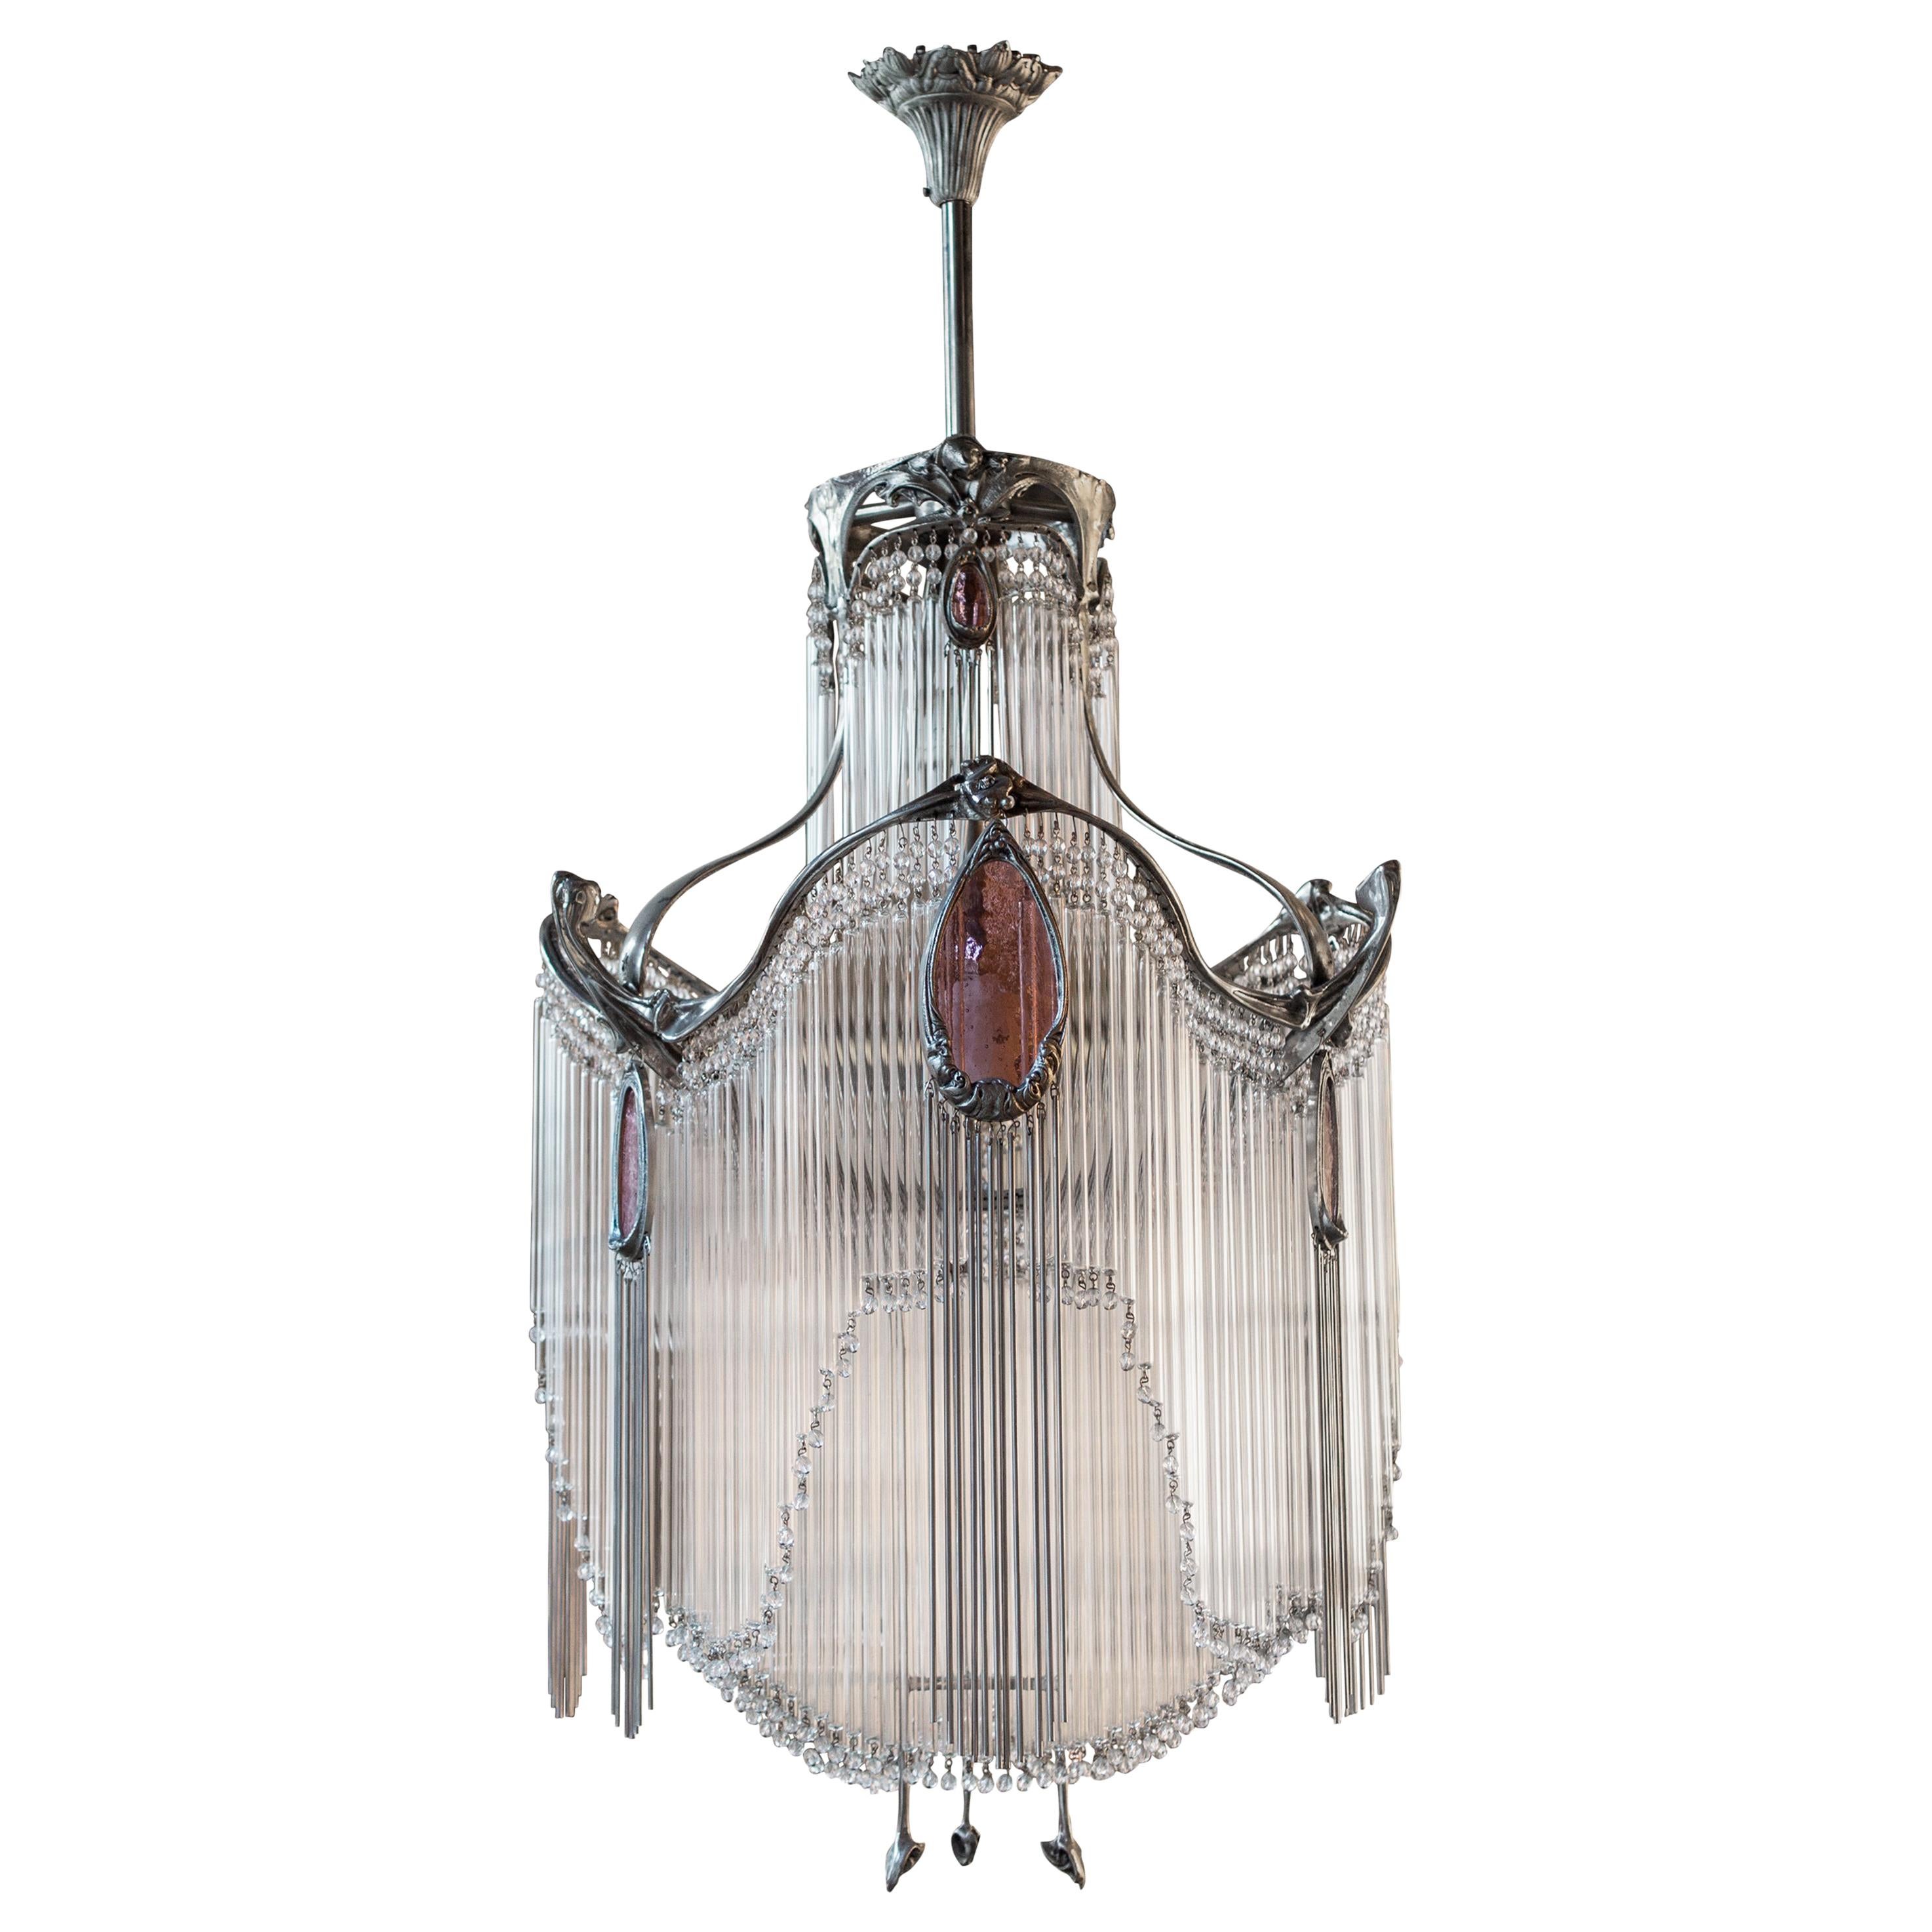 Art Nouveau Hector Guimard Chandelier with Nickel Finish For Sale